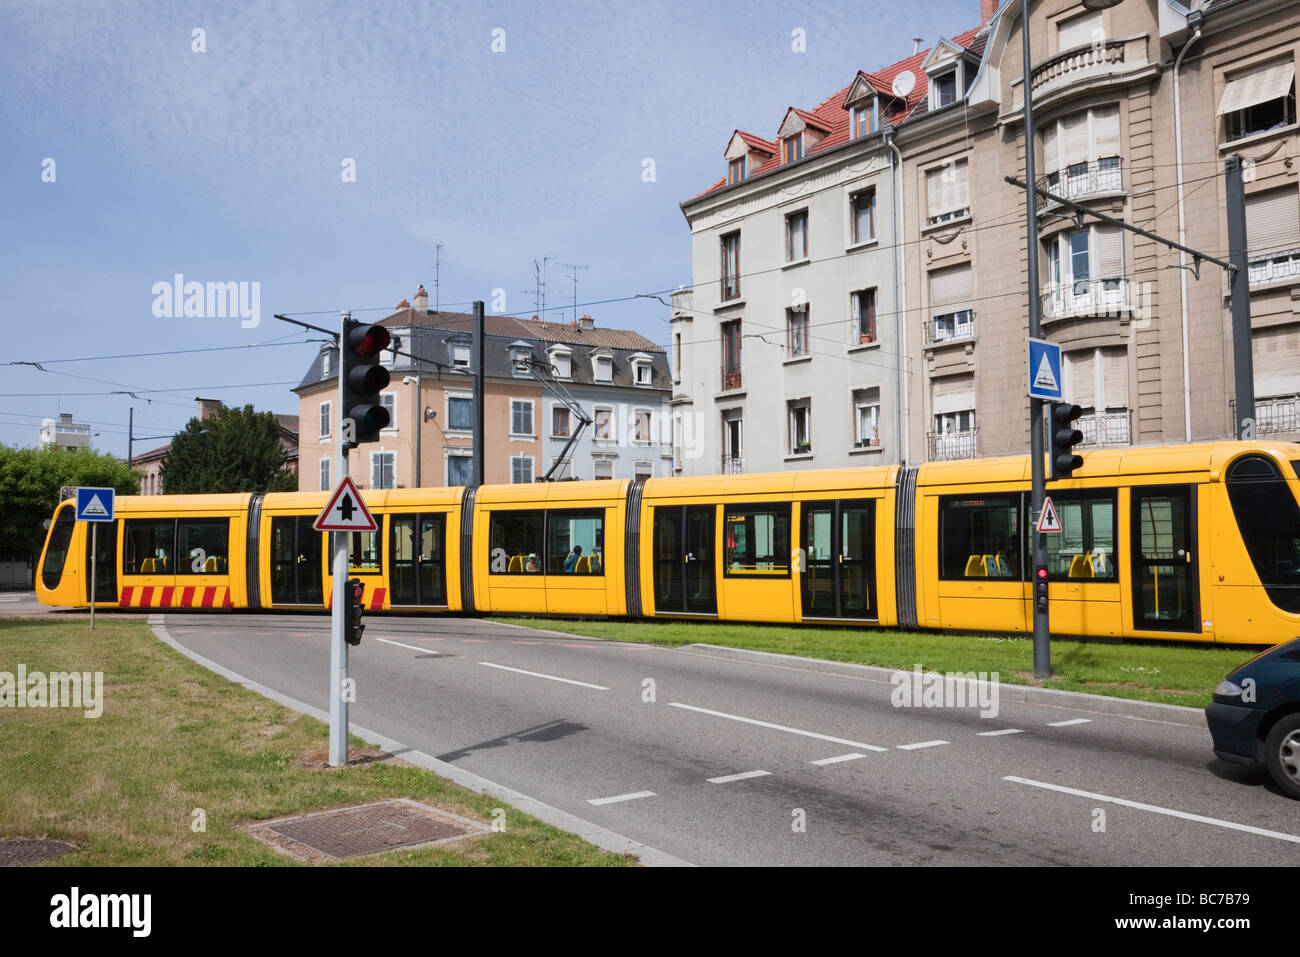 Mulhouse Alsace France Europe City tram crossing road junction with traffic stopped at lights Stock Photo